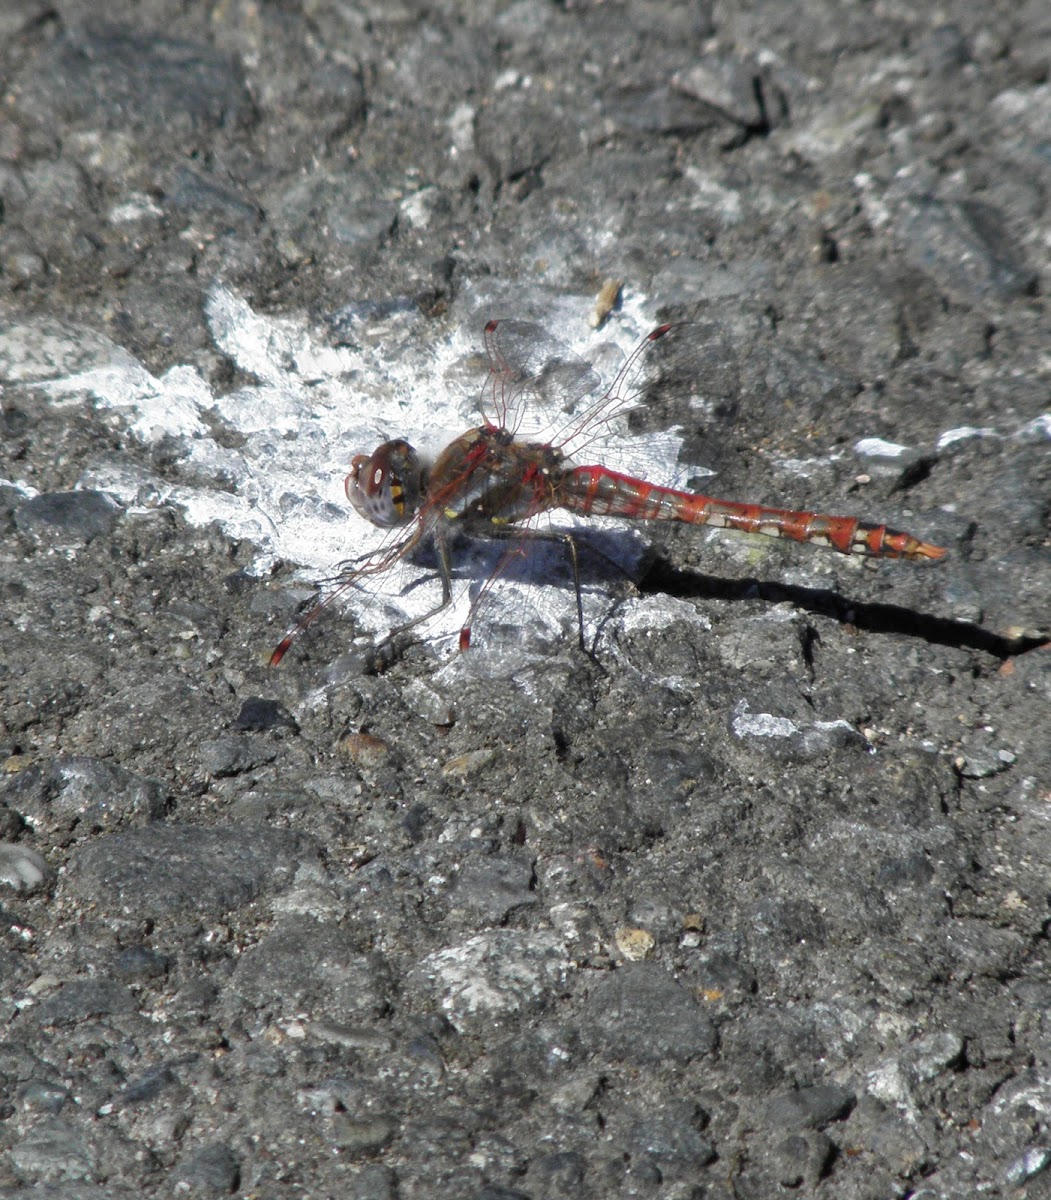 Variegated Meadowhawk dragonfly